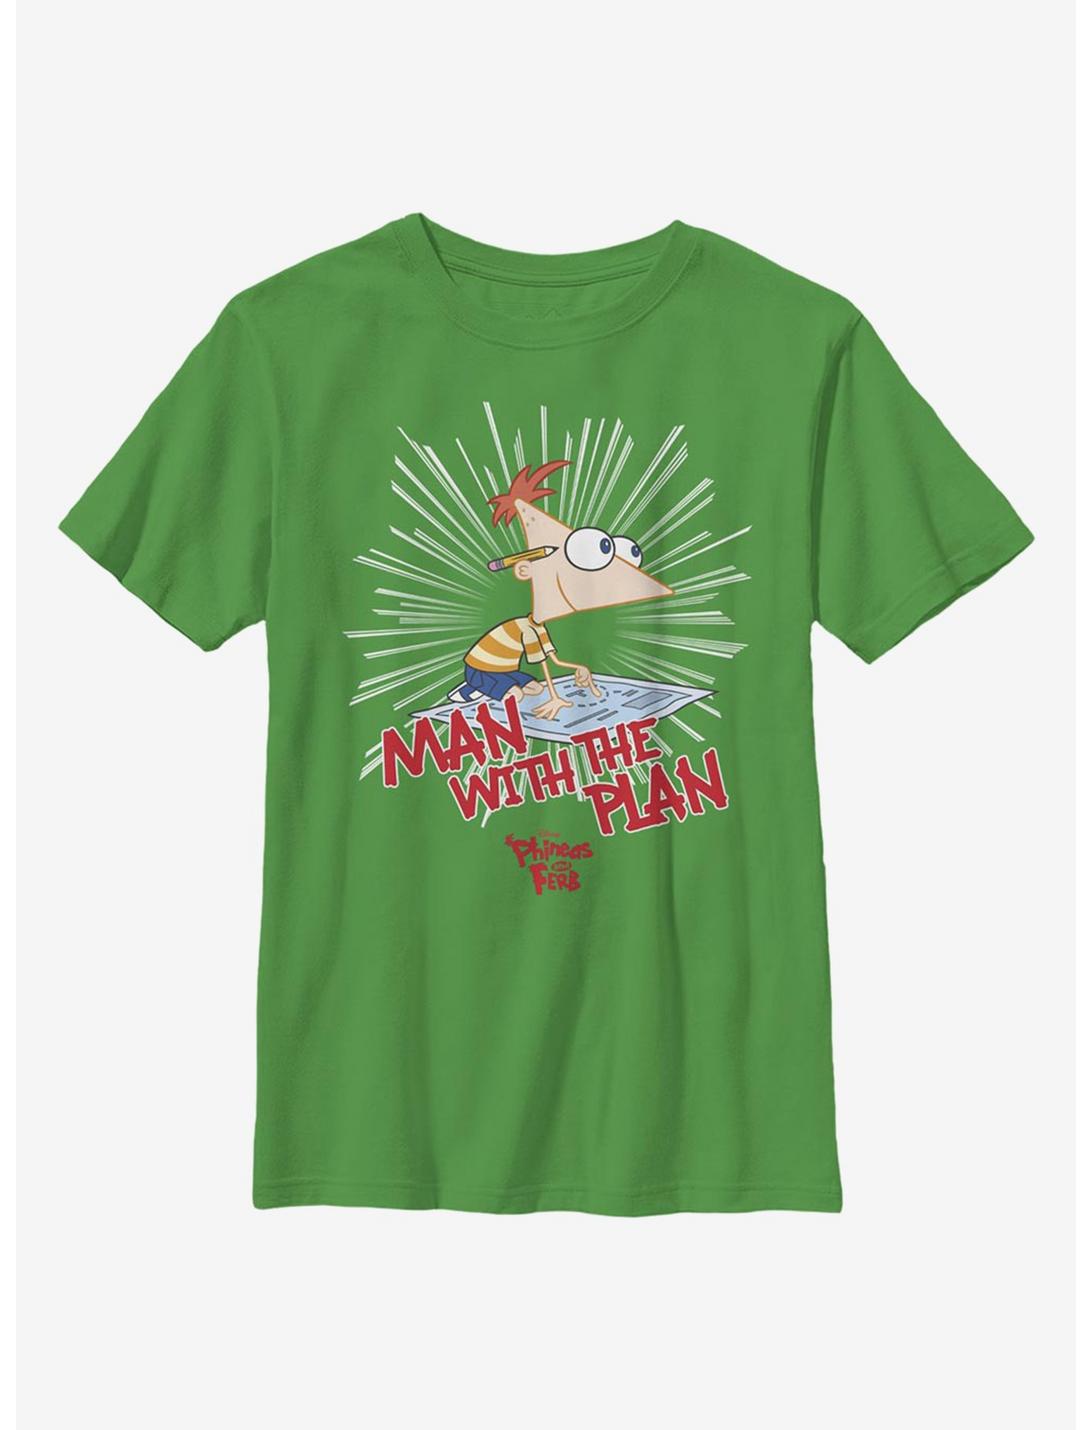 Disney Phineas And Ferb The Plan Man Youth T-Shirt, KELLY, hi-res